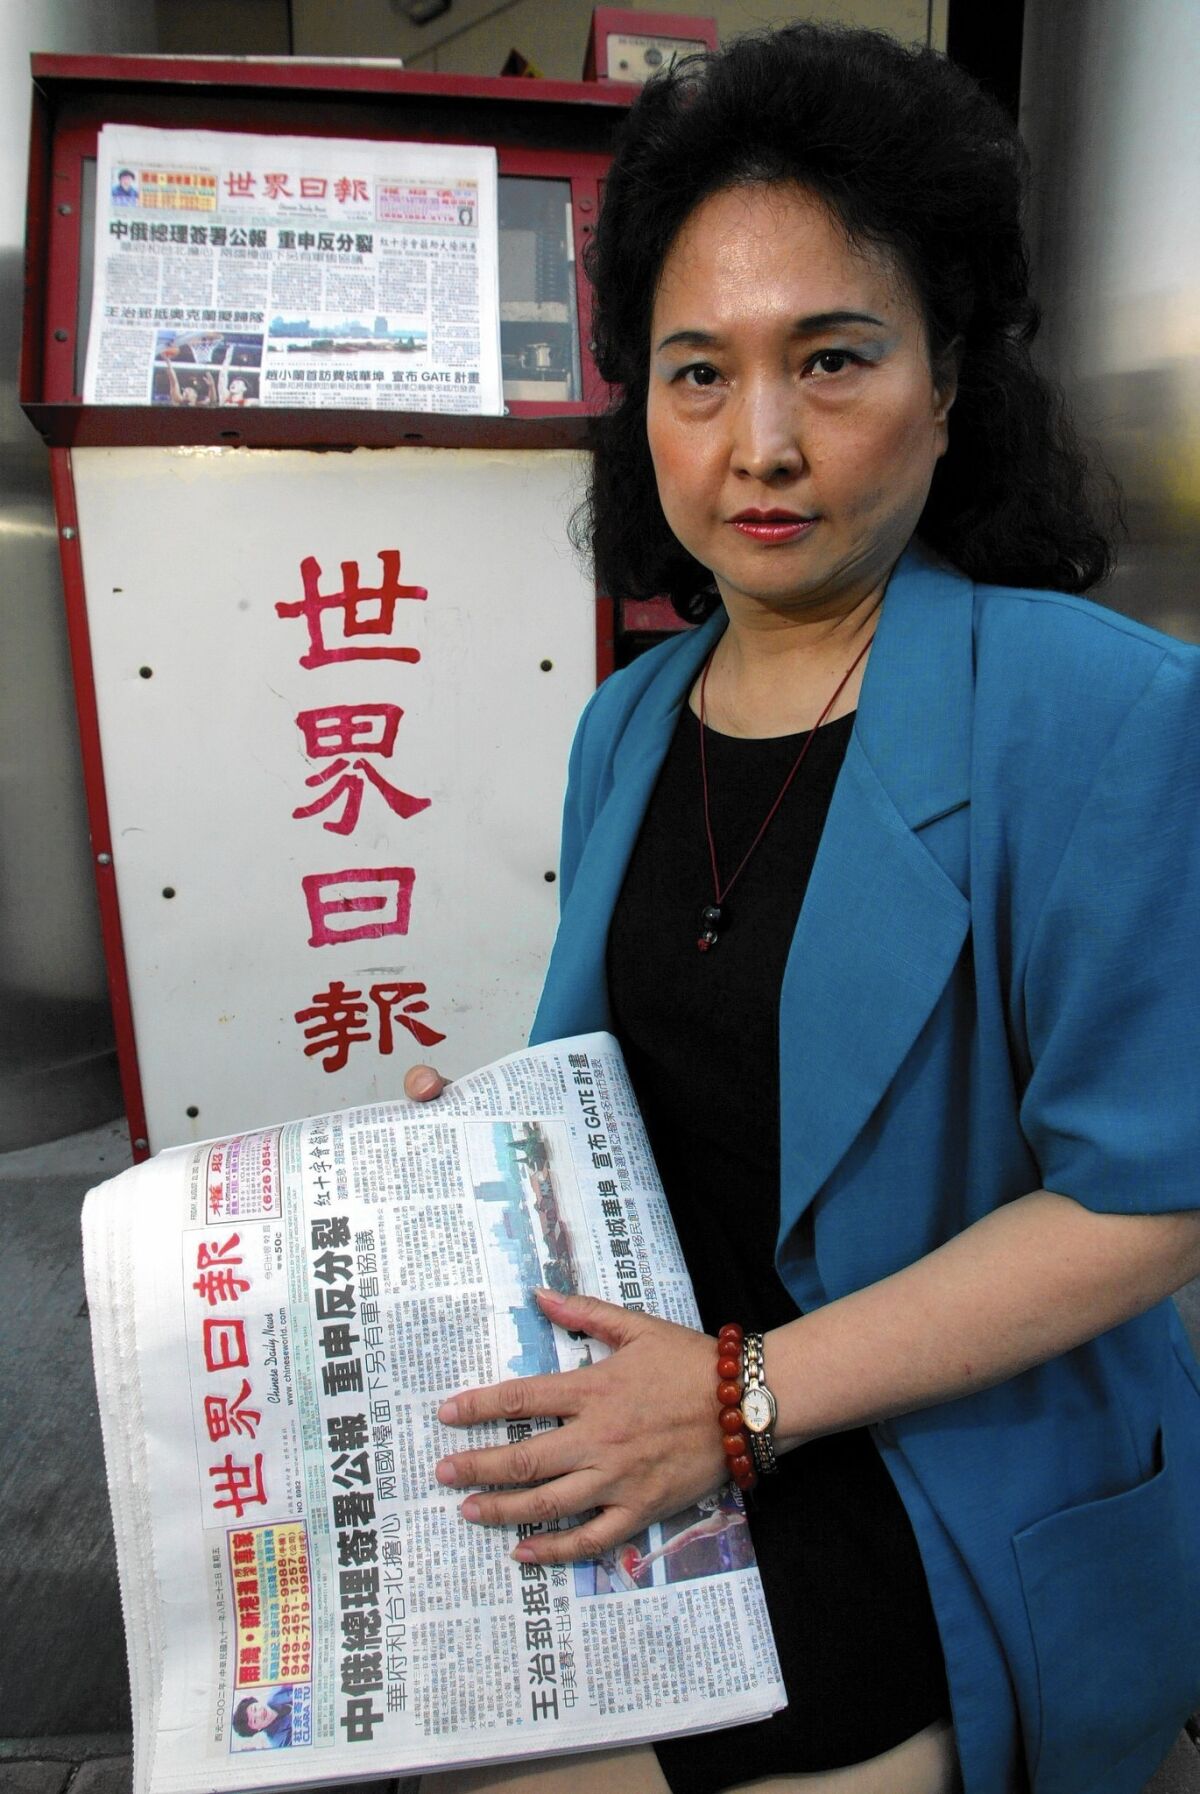 Lynne Wang, one of the original plaintiffs in the lawsuit against Chinese Daily News, is shown in 2002. She worked at the newspaper for 18 years as a reporter.